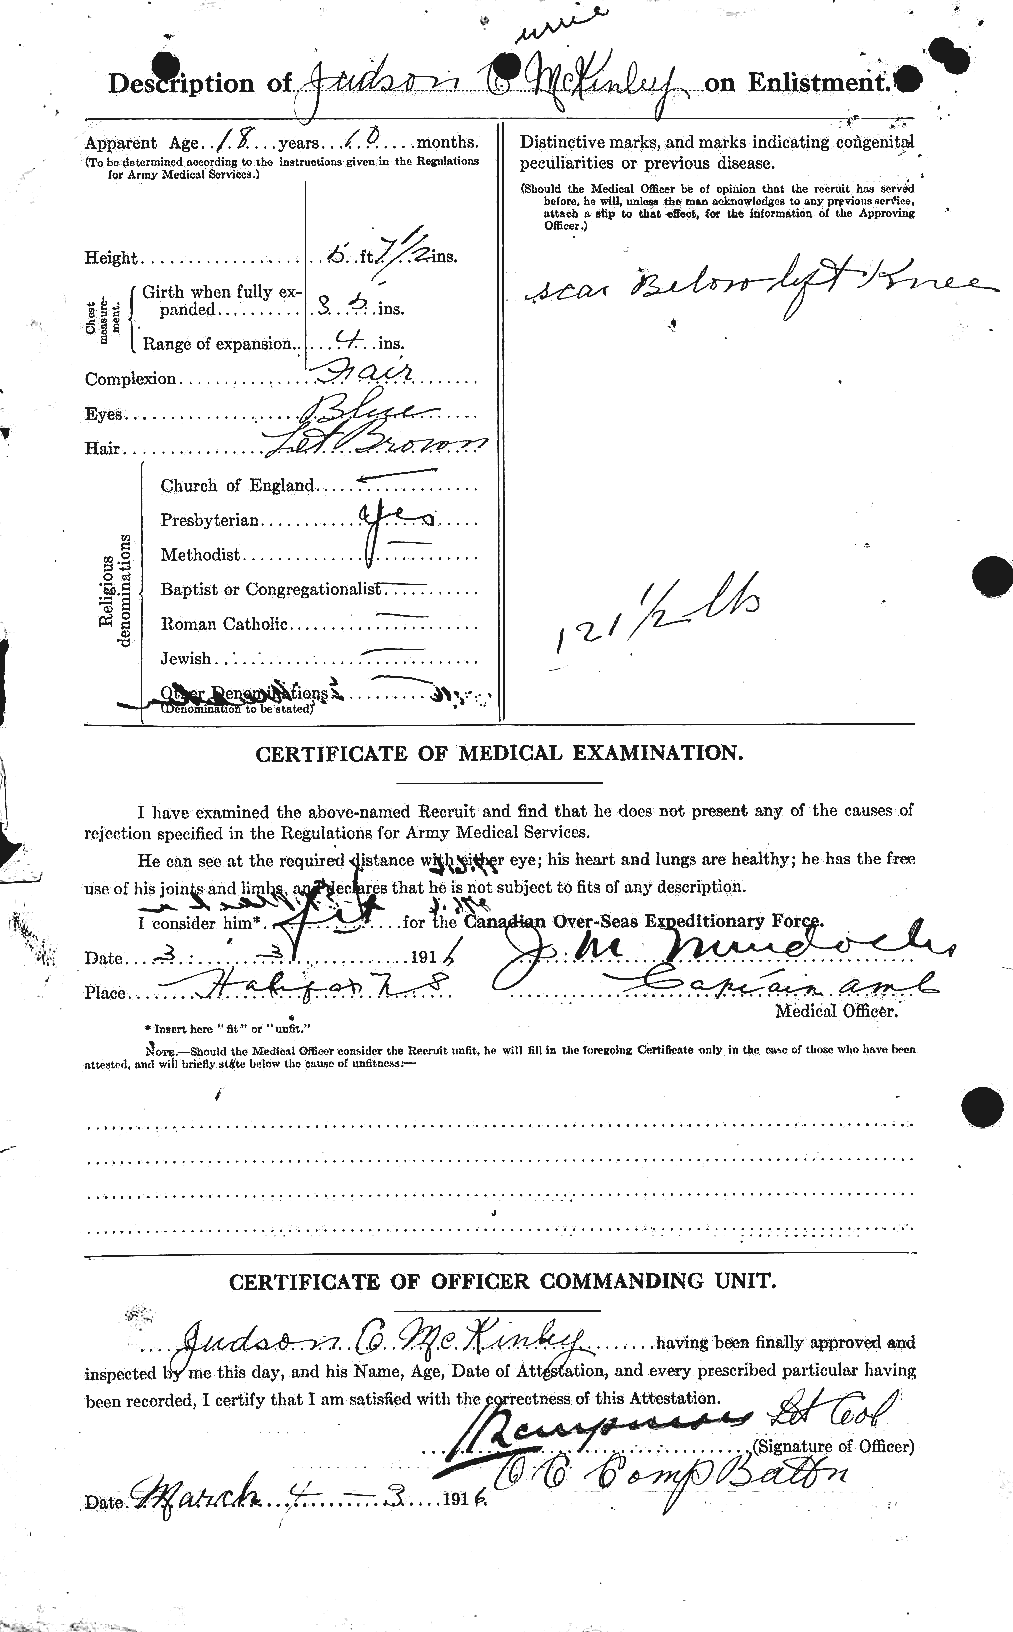 Personnel Records of the First World War - CEF 529598b